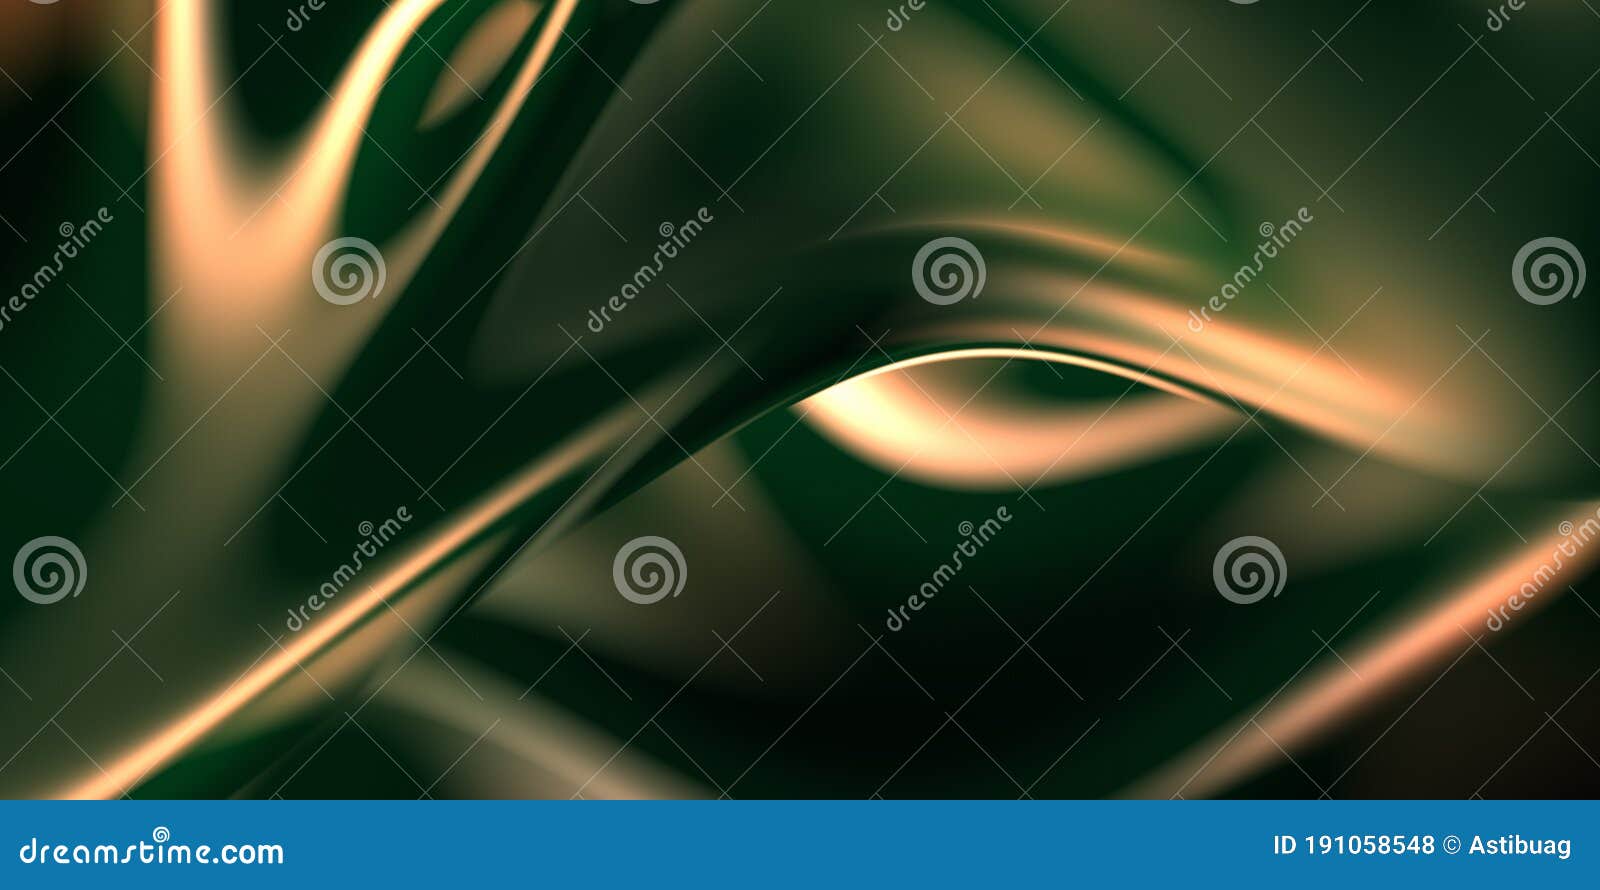 fluid mercurial substance. abstract iridescent background. smooth gradient layout for decoration